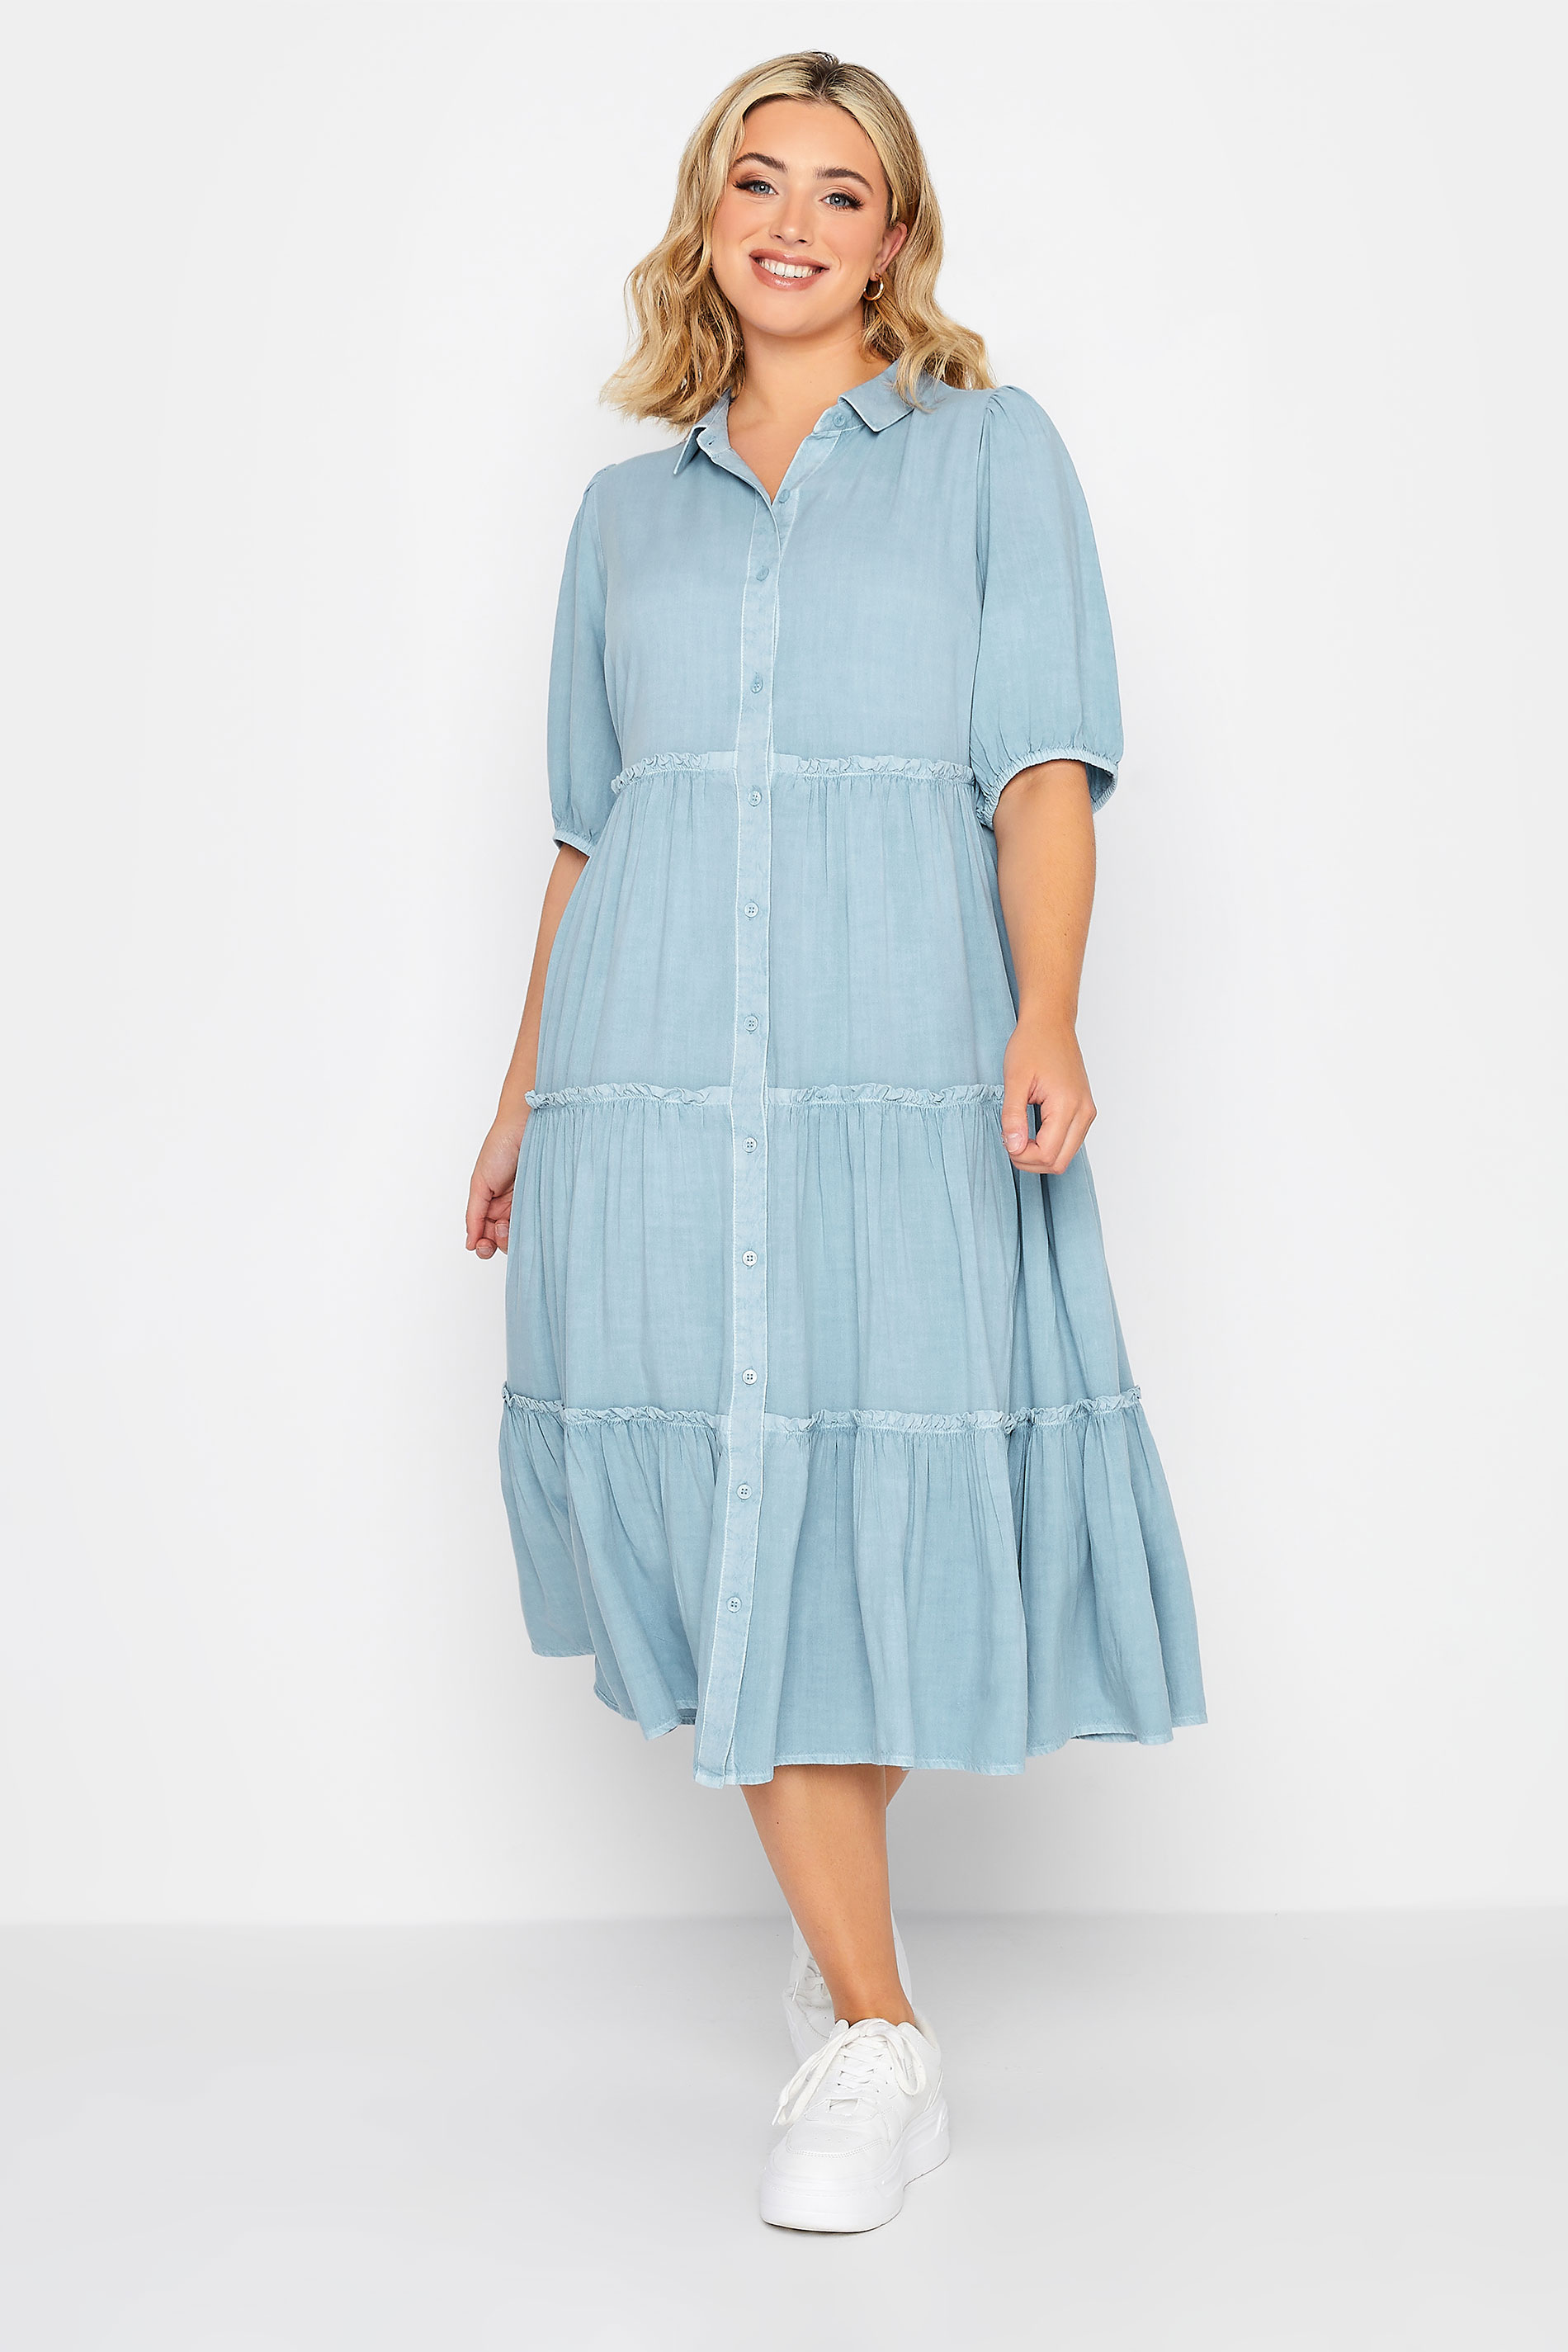 YOURS Curve Plus Size Blue Acid Wash Tiered Chambray Denim Shirt Dress | Yours Clothing  2